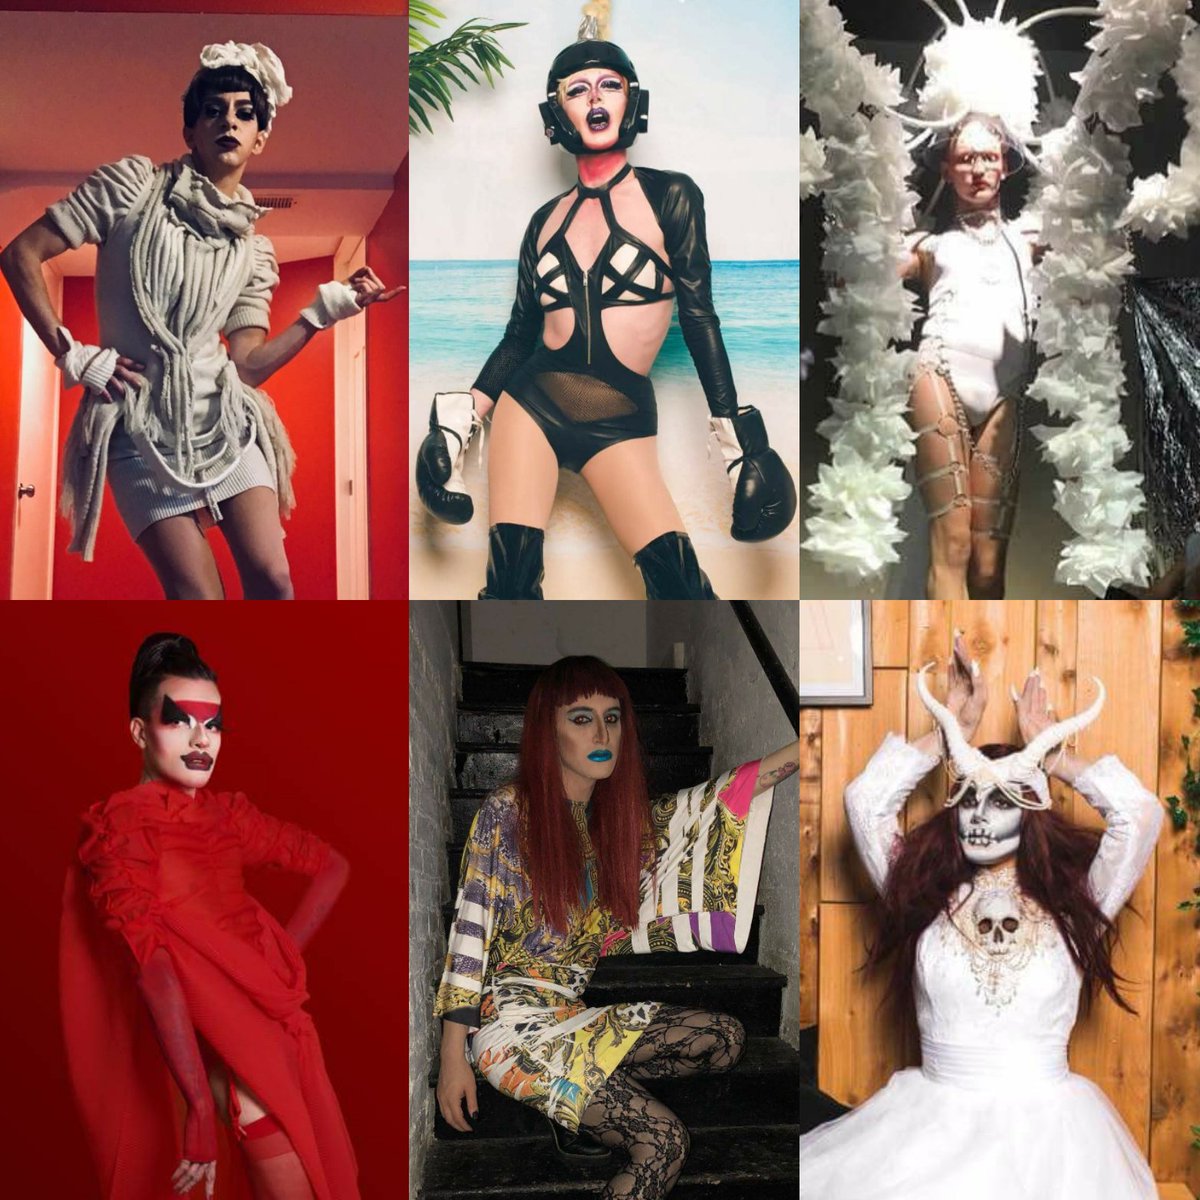 The cast for the competition edition of Rapture is here! Join us on Saturday, September 8th to see Stasia Coup, Bosco, Snake Oil, One, Michete, and Aria Kane compete for a performance residency at Rapture! 😍 Presale tix available at kremwerk.com